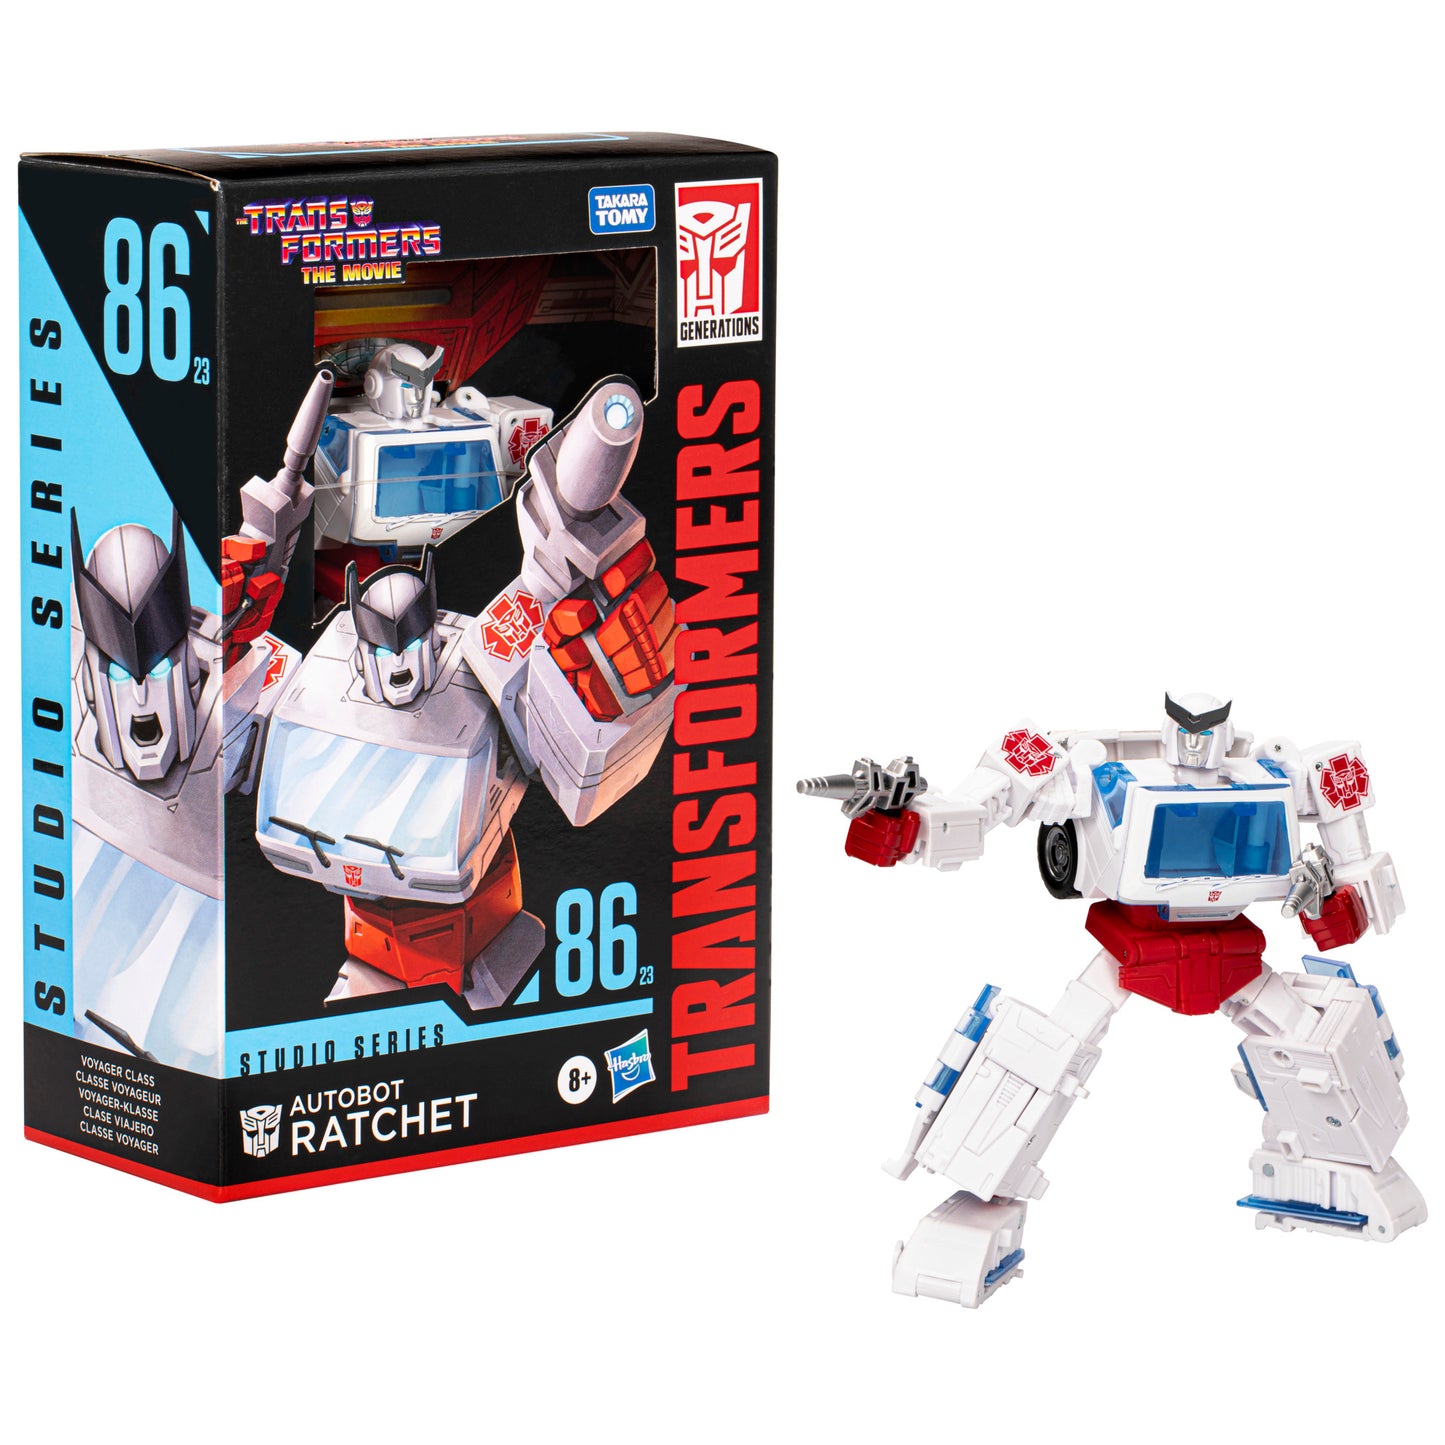 Transformers Toys Studio Series Voyager The Transformers: The Movie 86-23 Autobot Ratchet Toy, 6.5-inch, Action Figure For Boys And Girls Ages 8 and Up